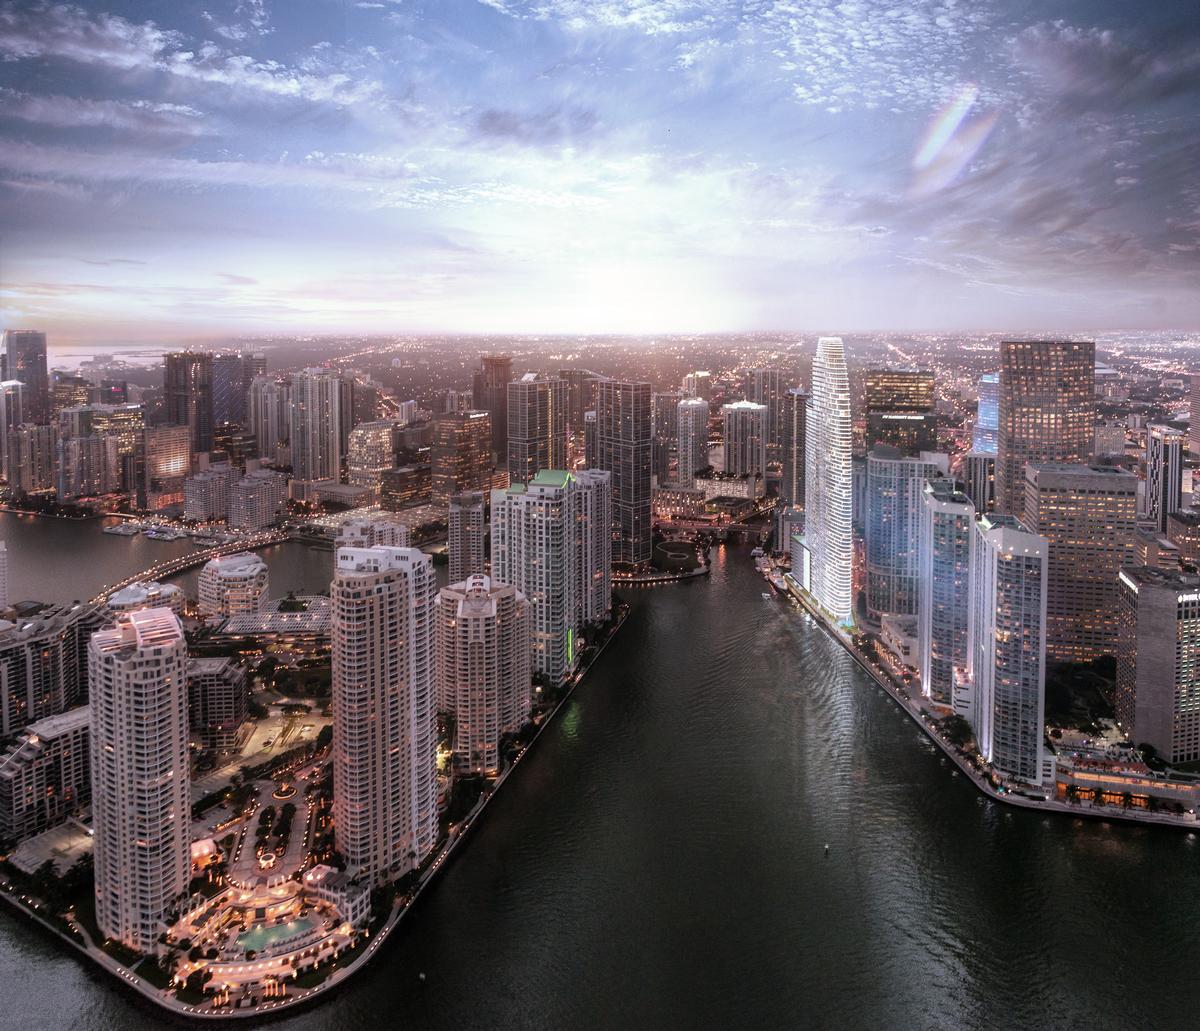 Aston Martin Residences is being developed by G and G Business Developments / Aston Martin